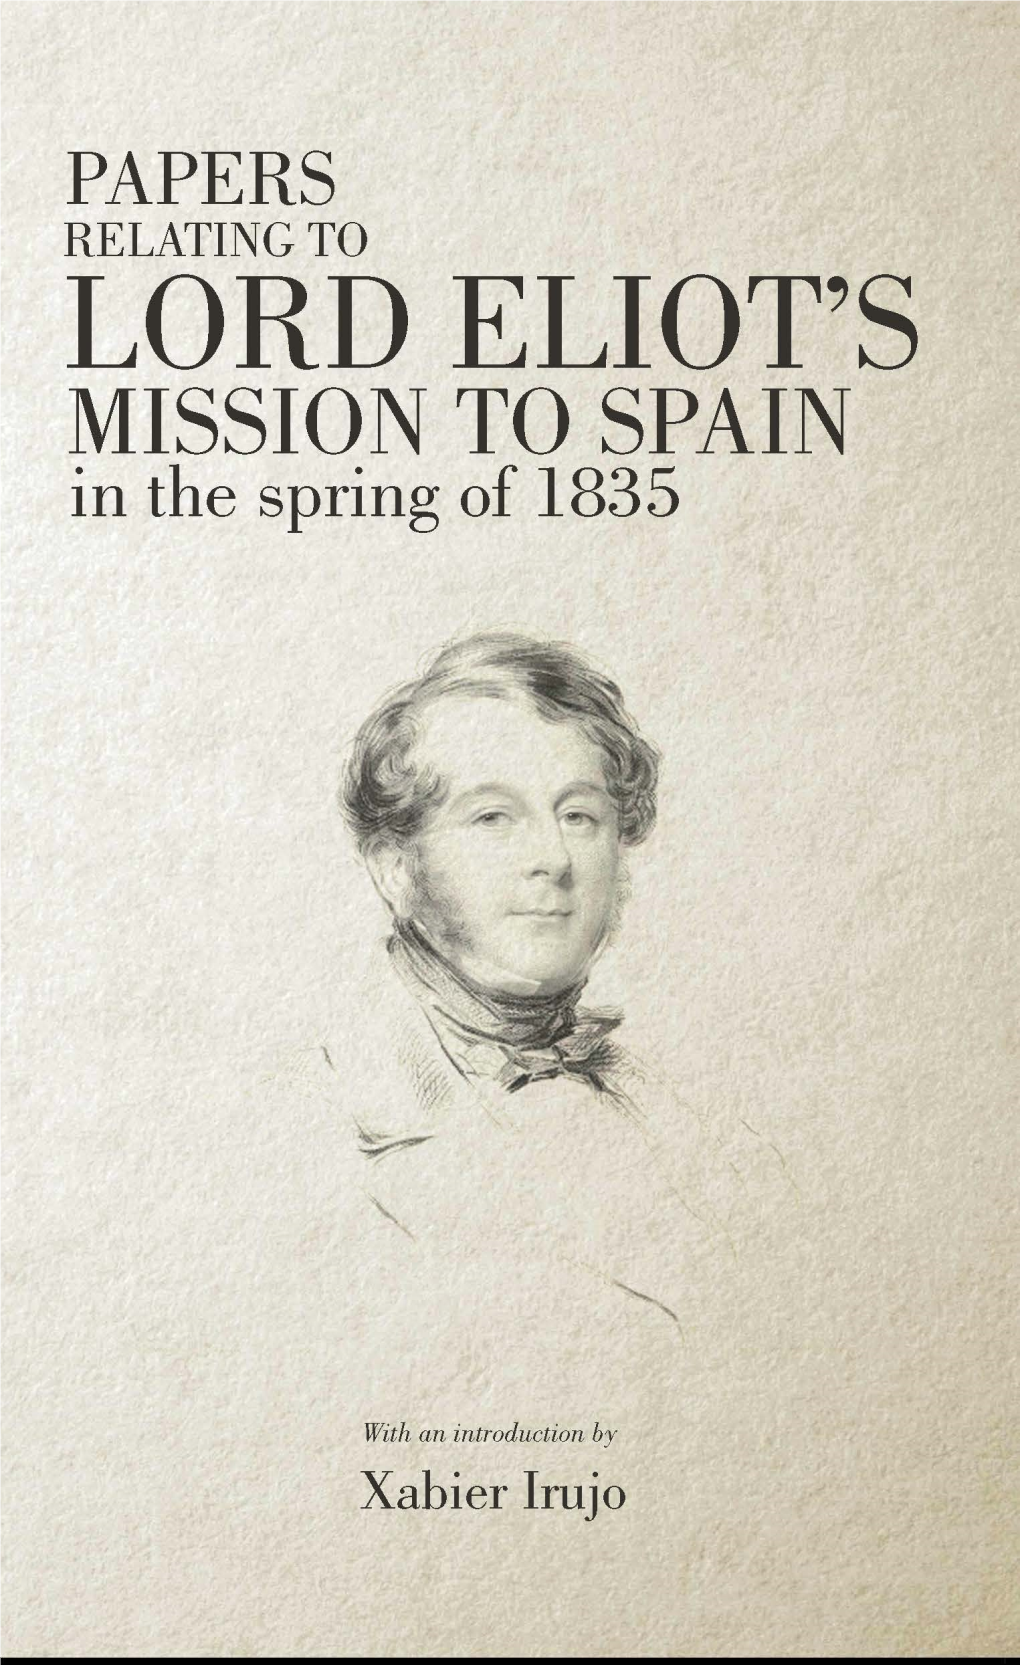 PAPERS RELATING to LORD ELIOT's MISSION to SPAIN in the Spring of 1835